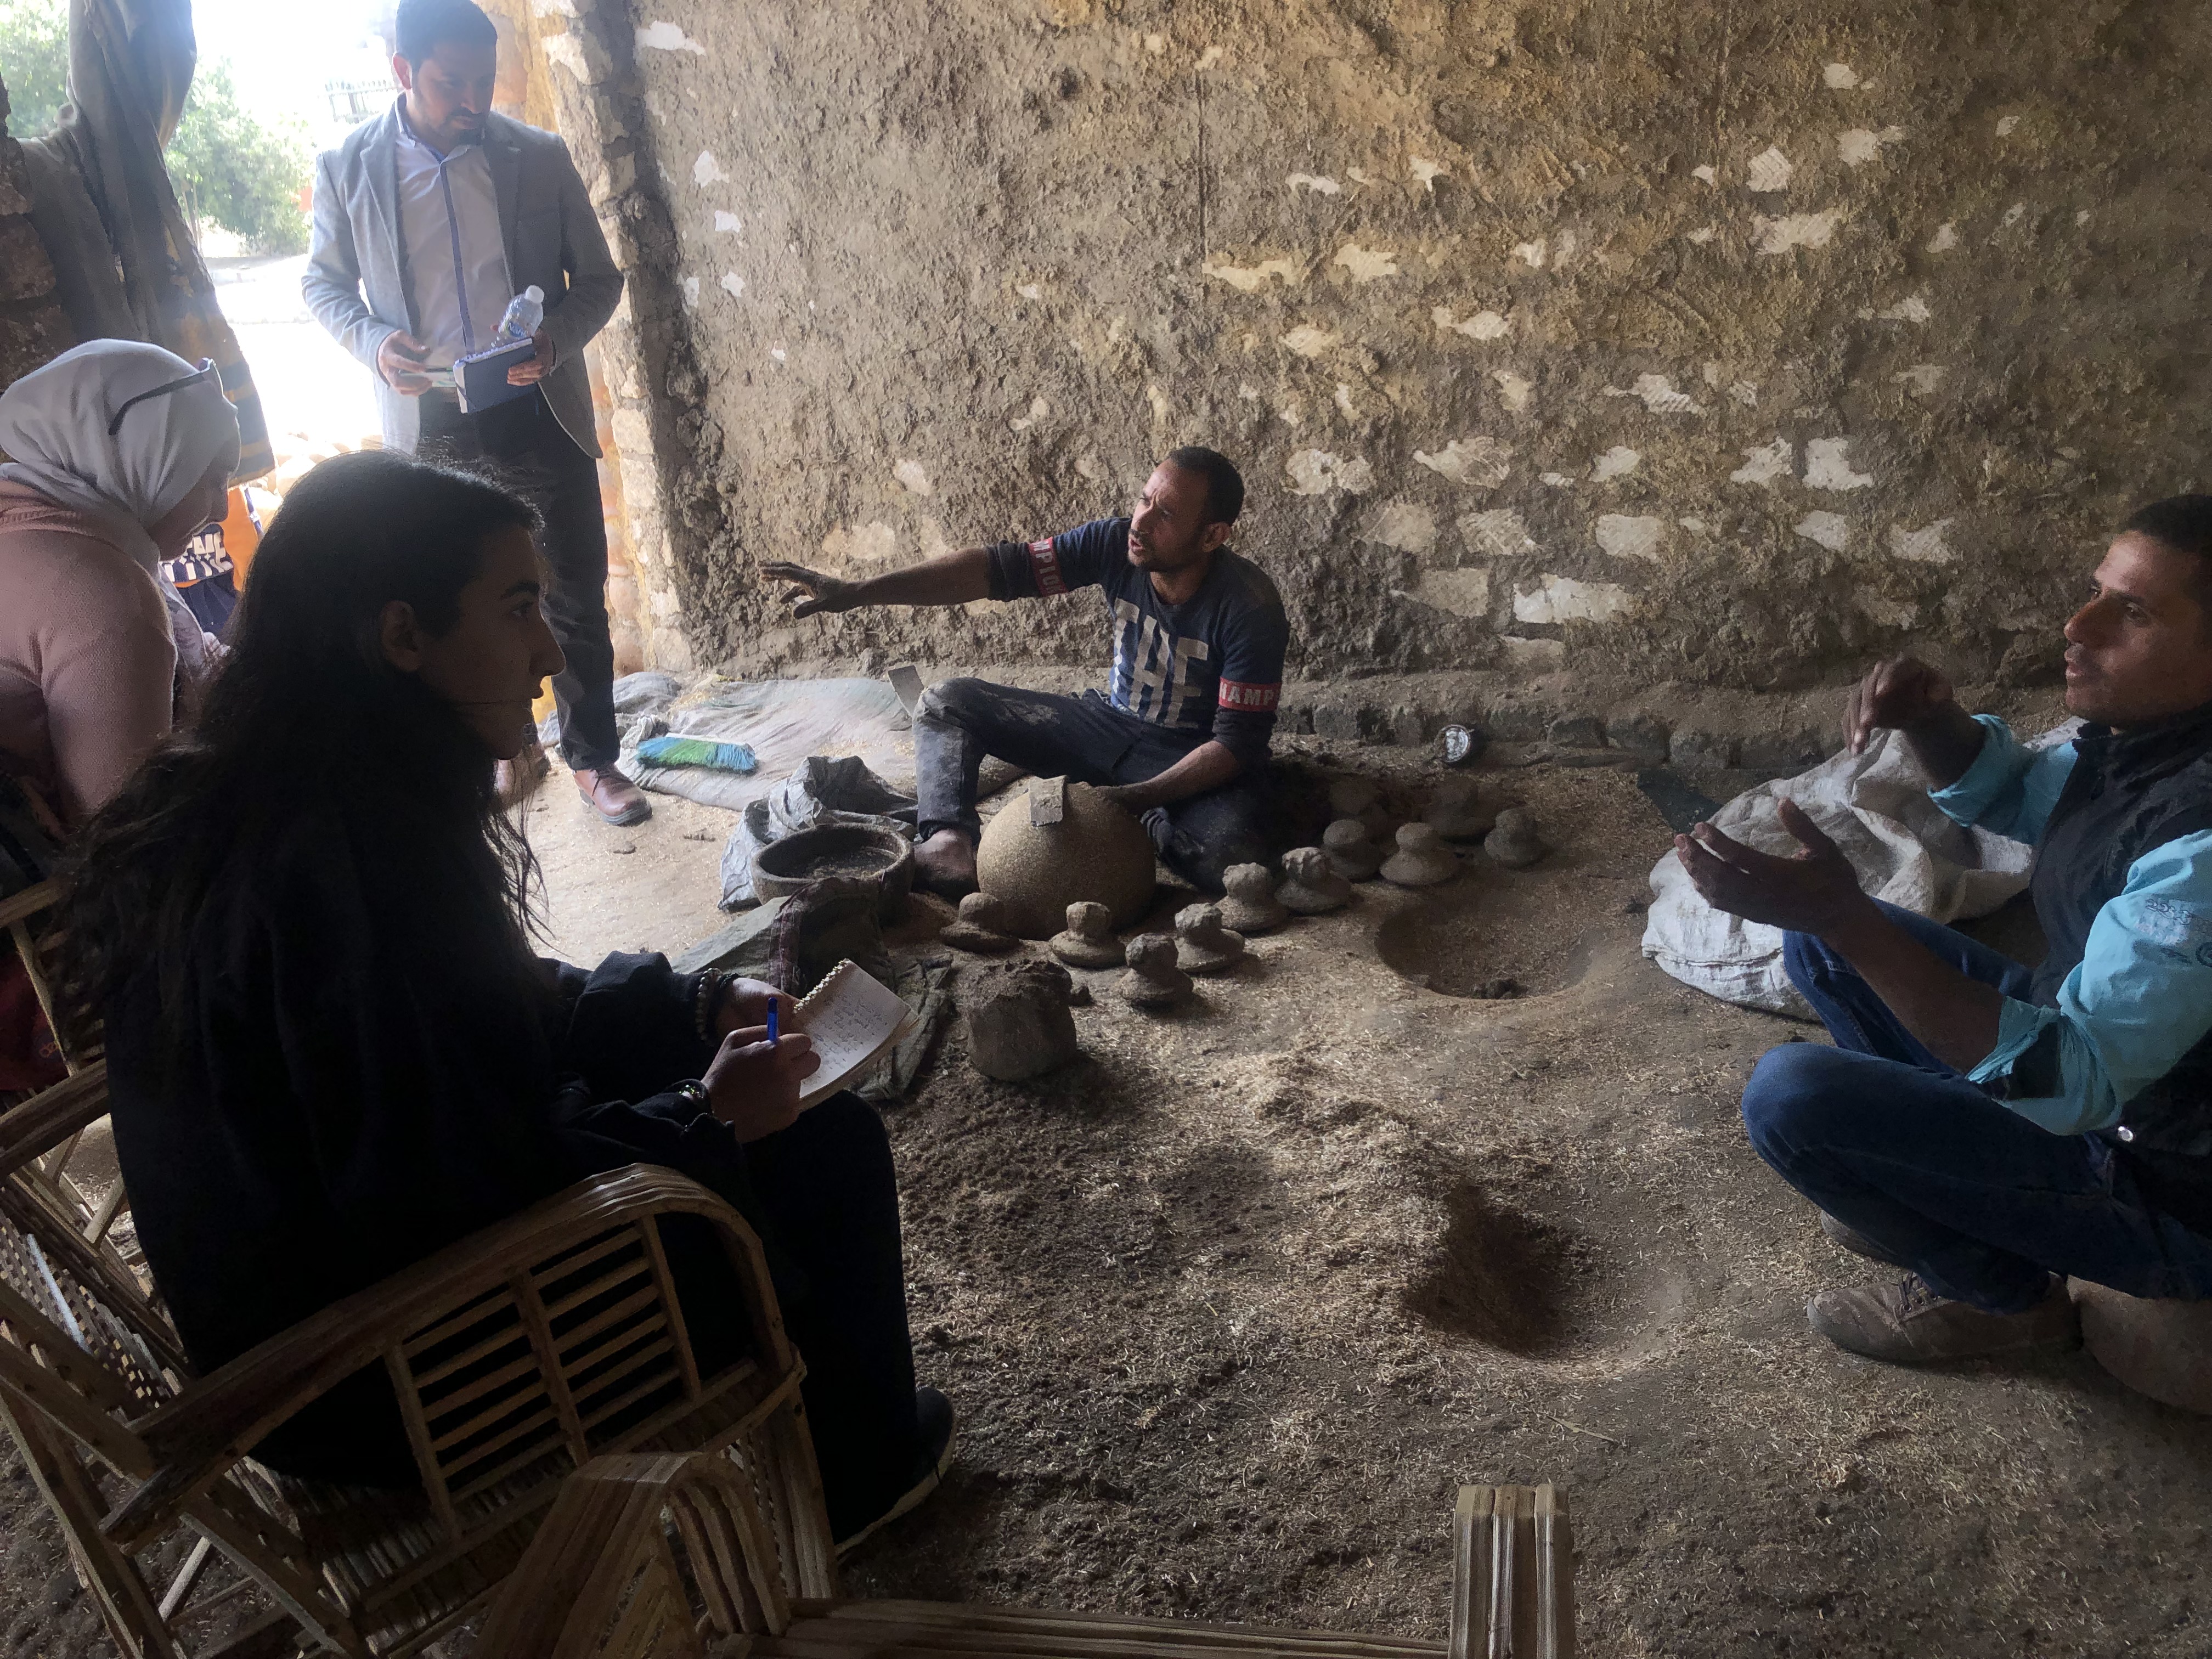 The OULA team conducts research in Fayoum, Egypt